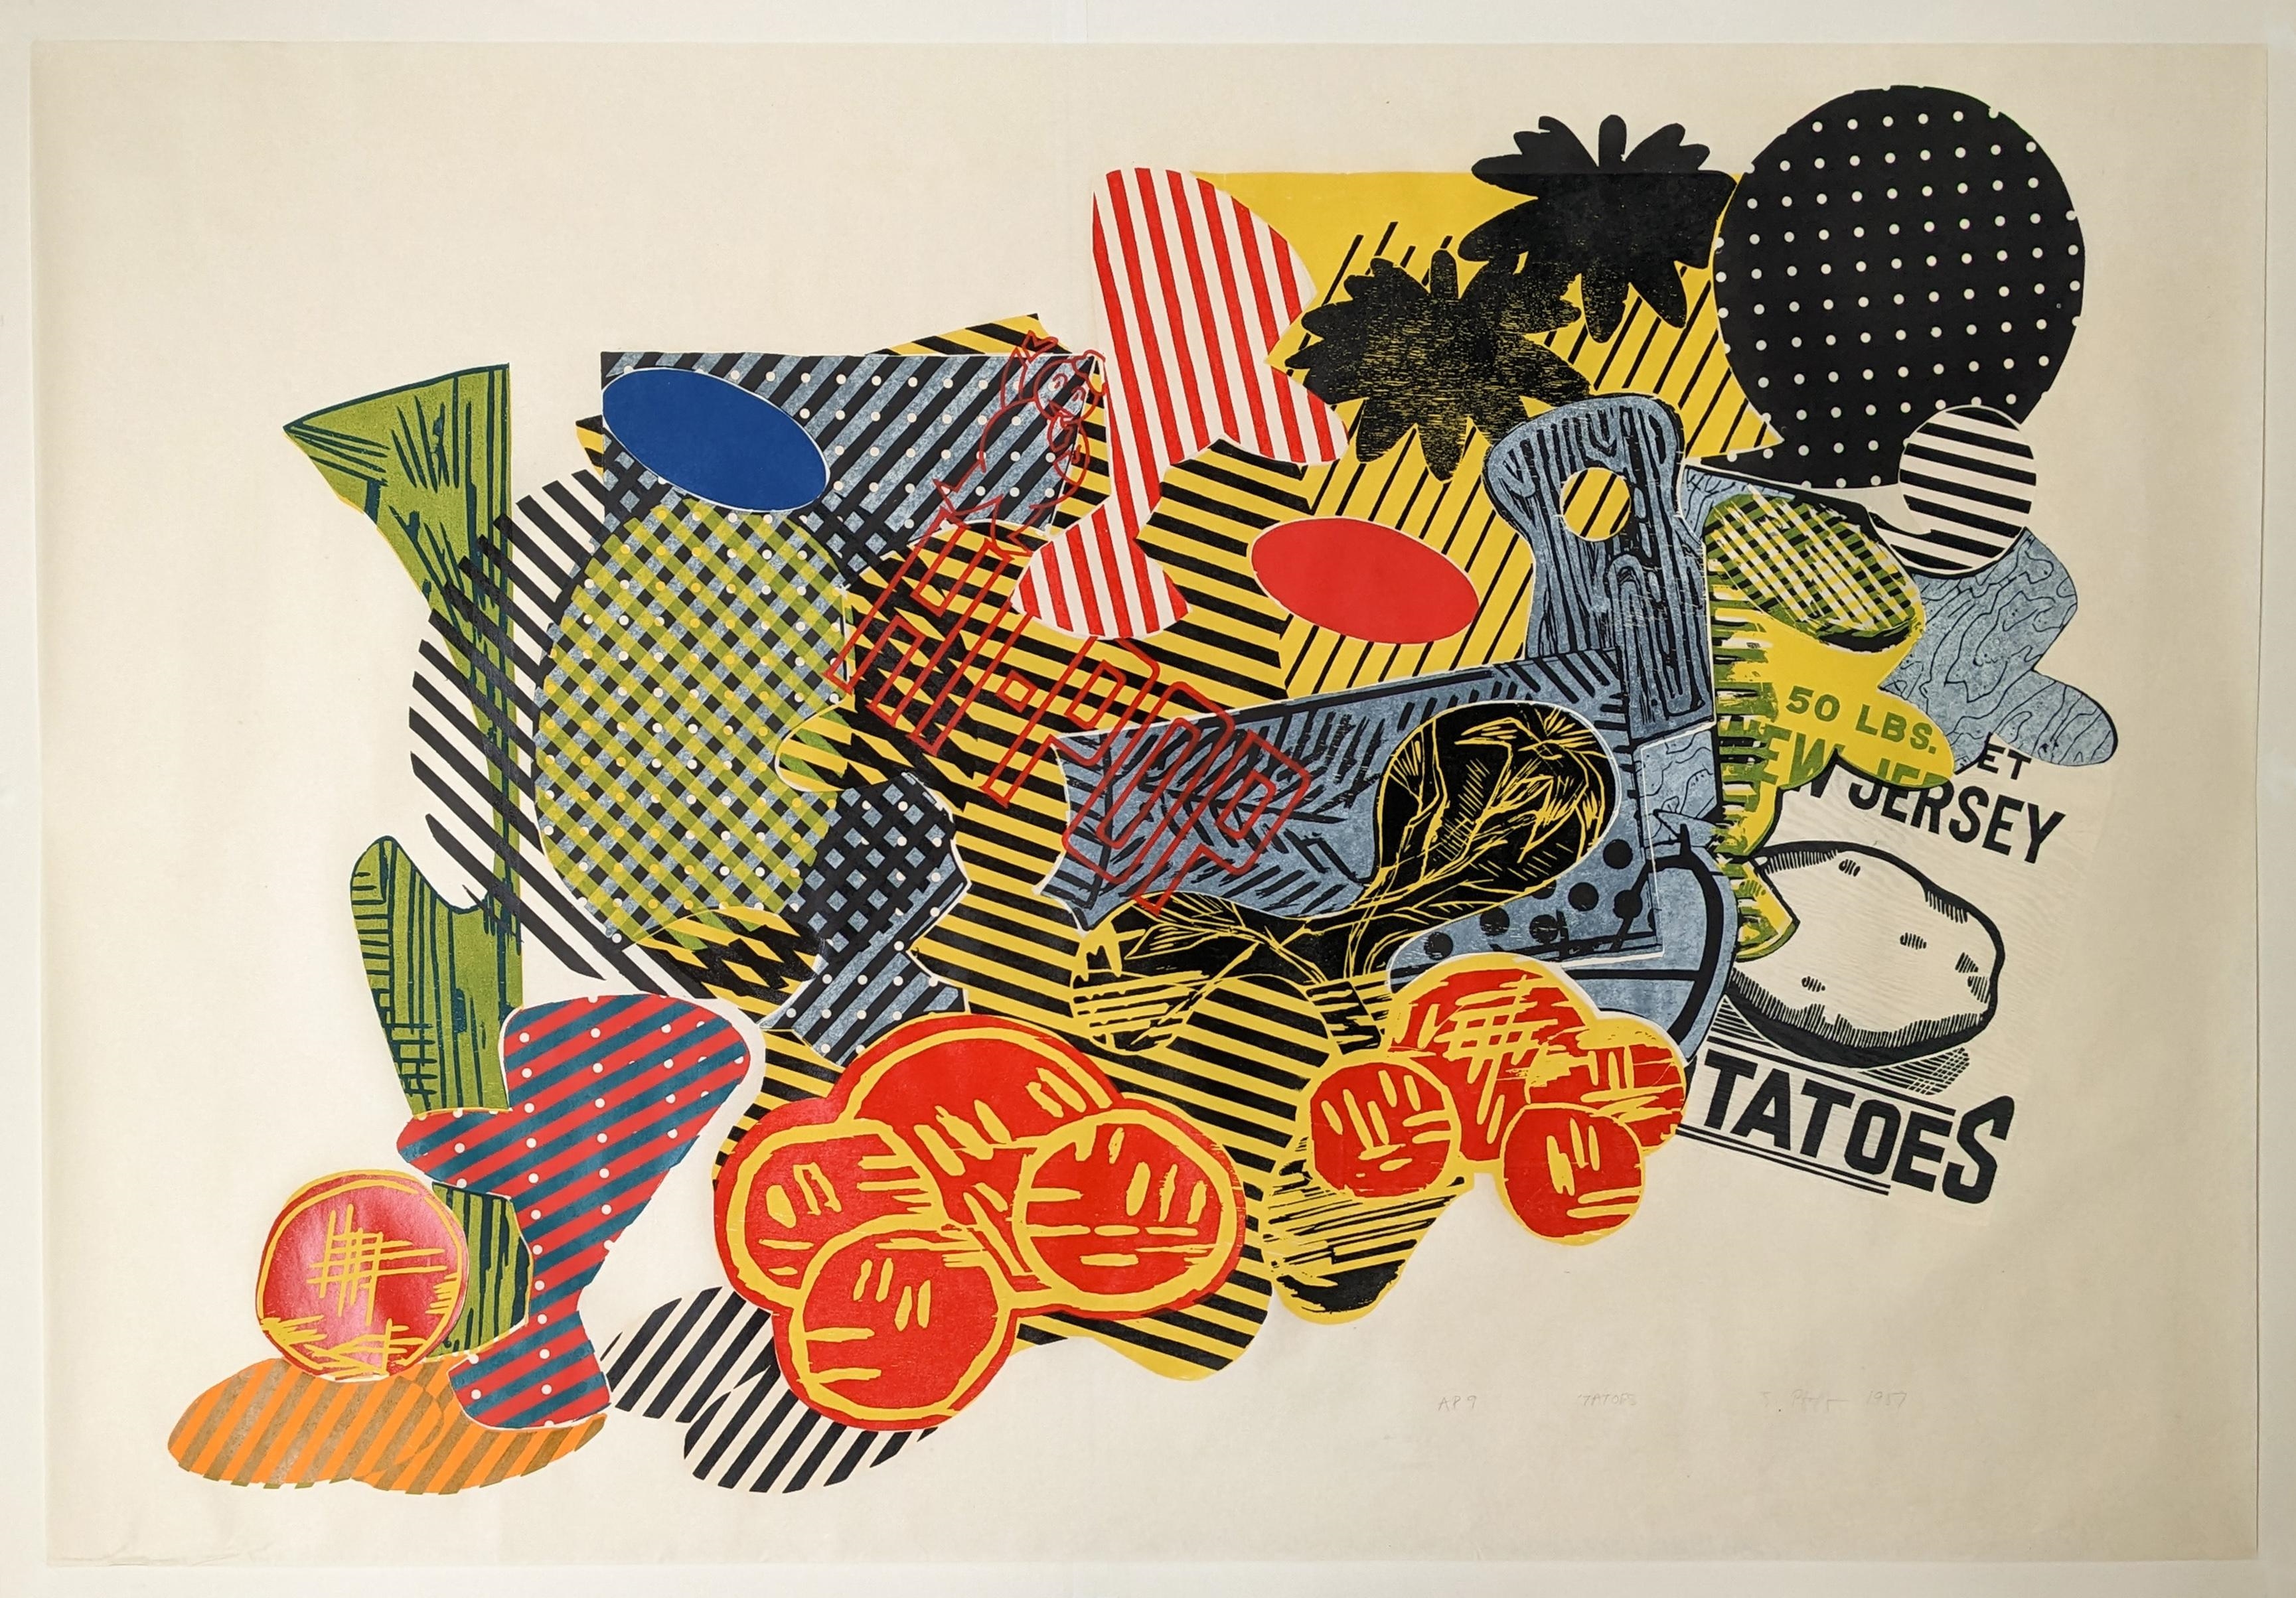 Artwork by Judy Pfaff, Tatoes, Made of Color woodcut on Japan paper